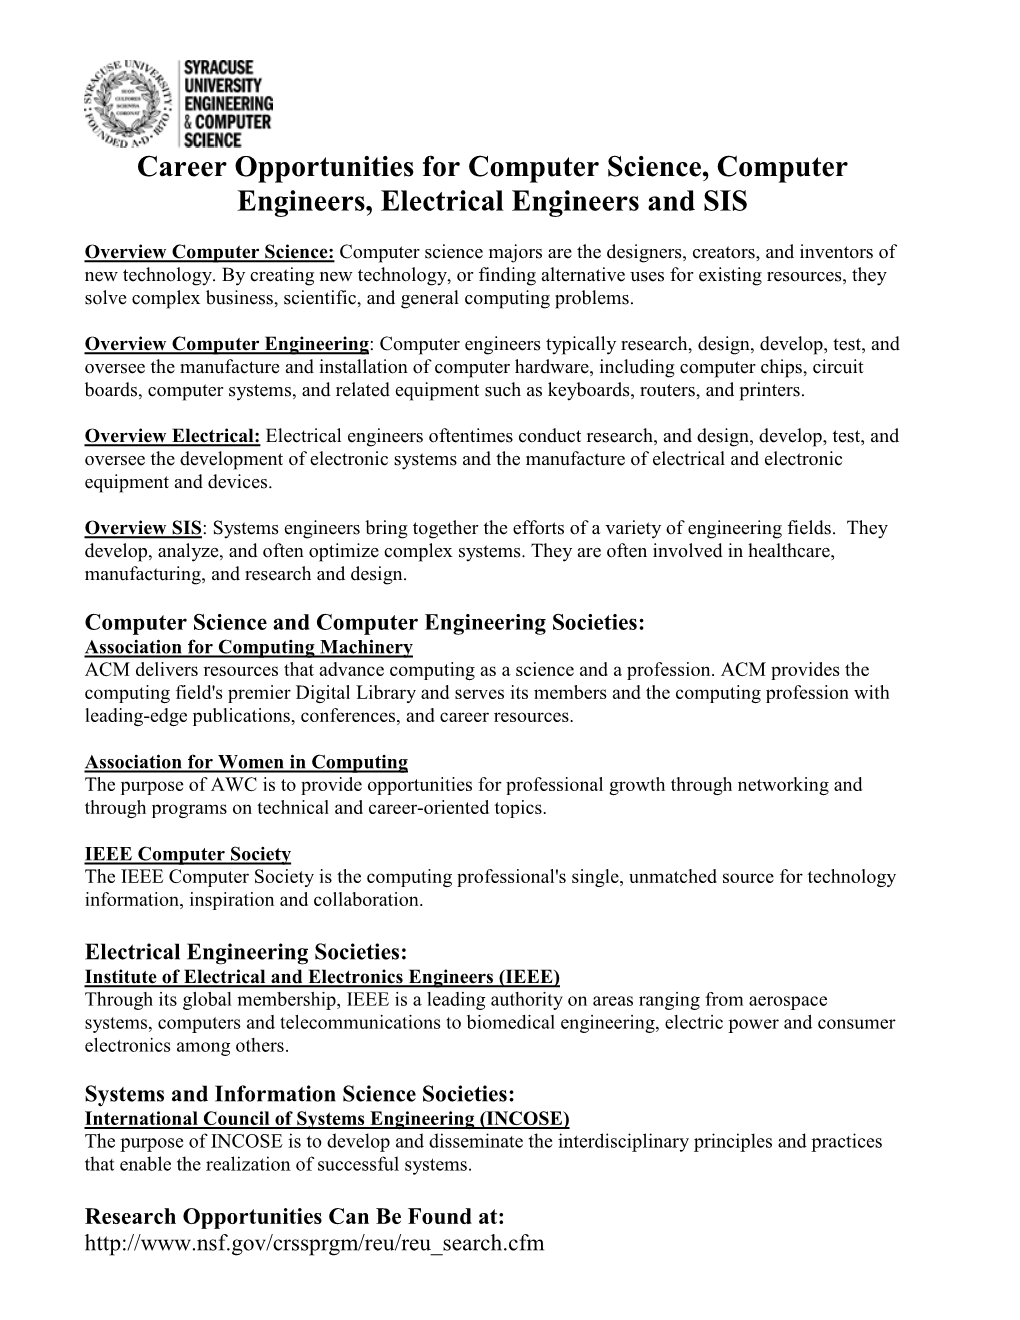 Career Opportunities for Computer Science, Computer Engineers, Electrical Engineers and SIS